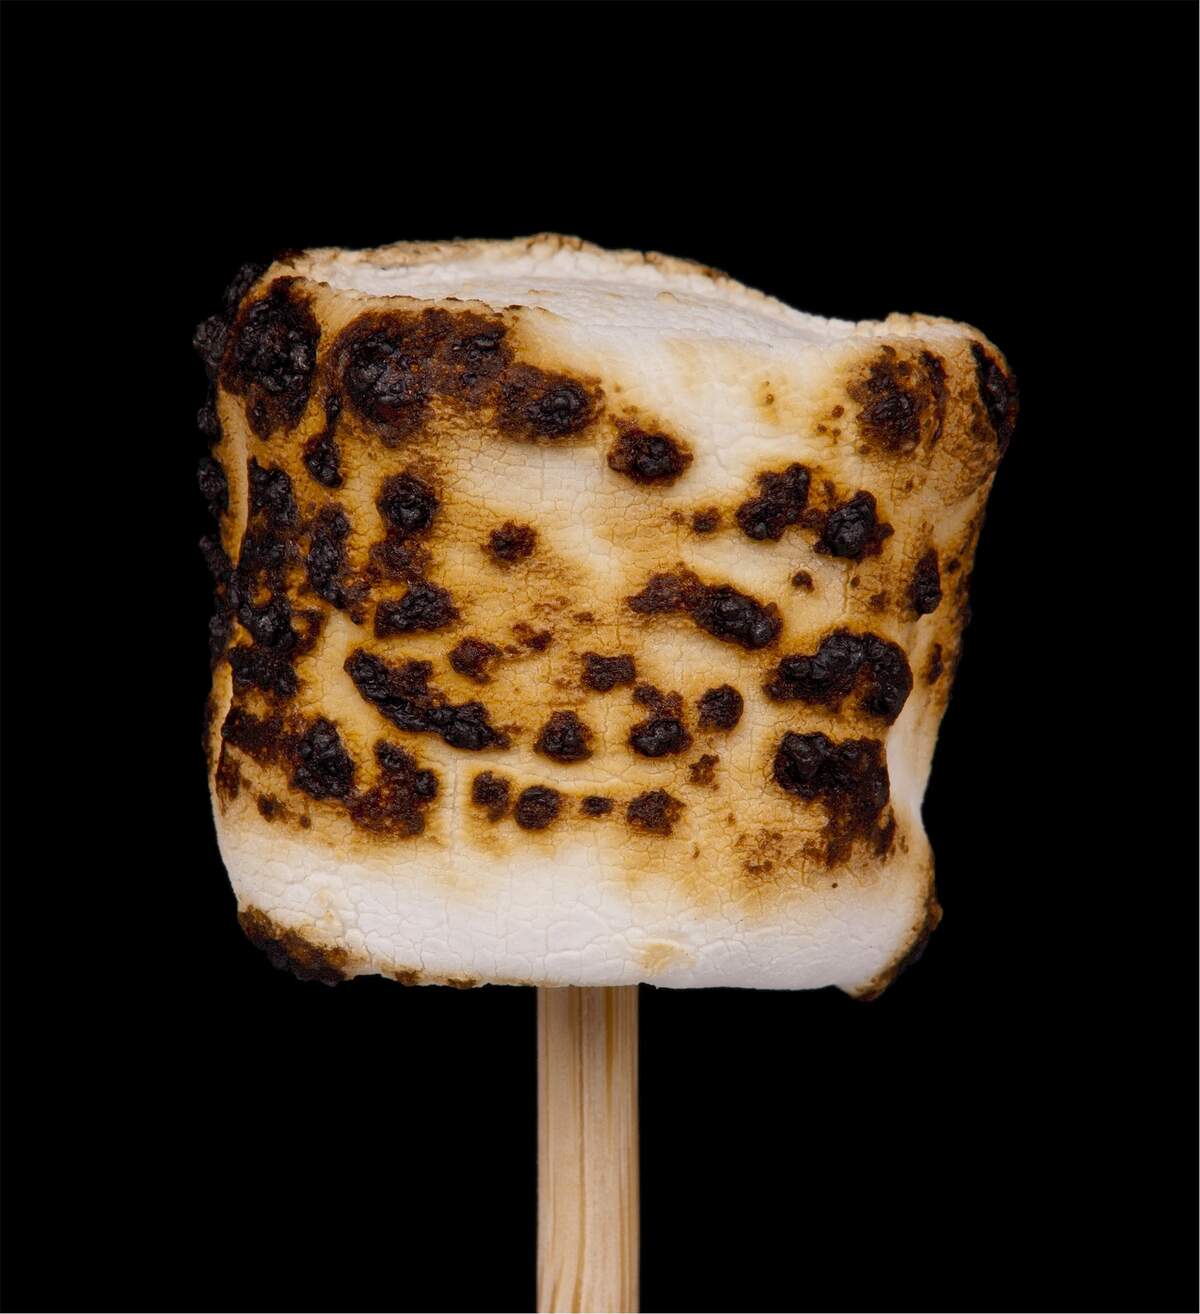 Image for National Toasted Marshmallow Day